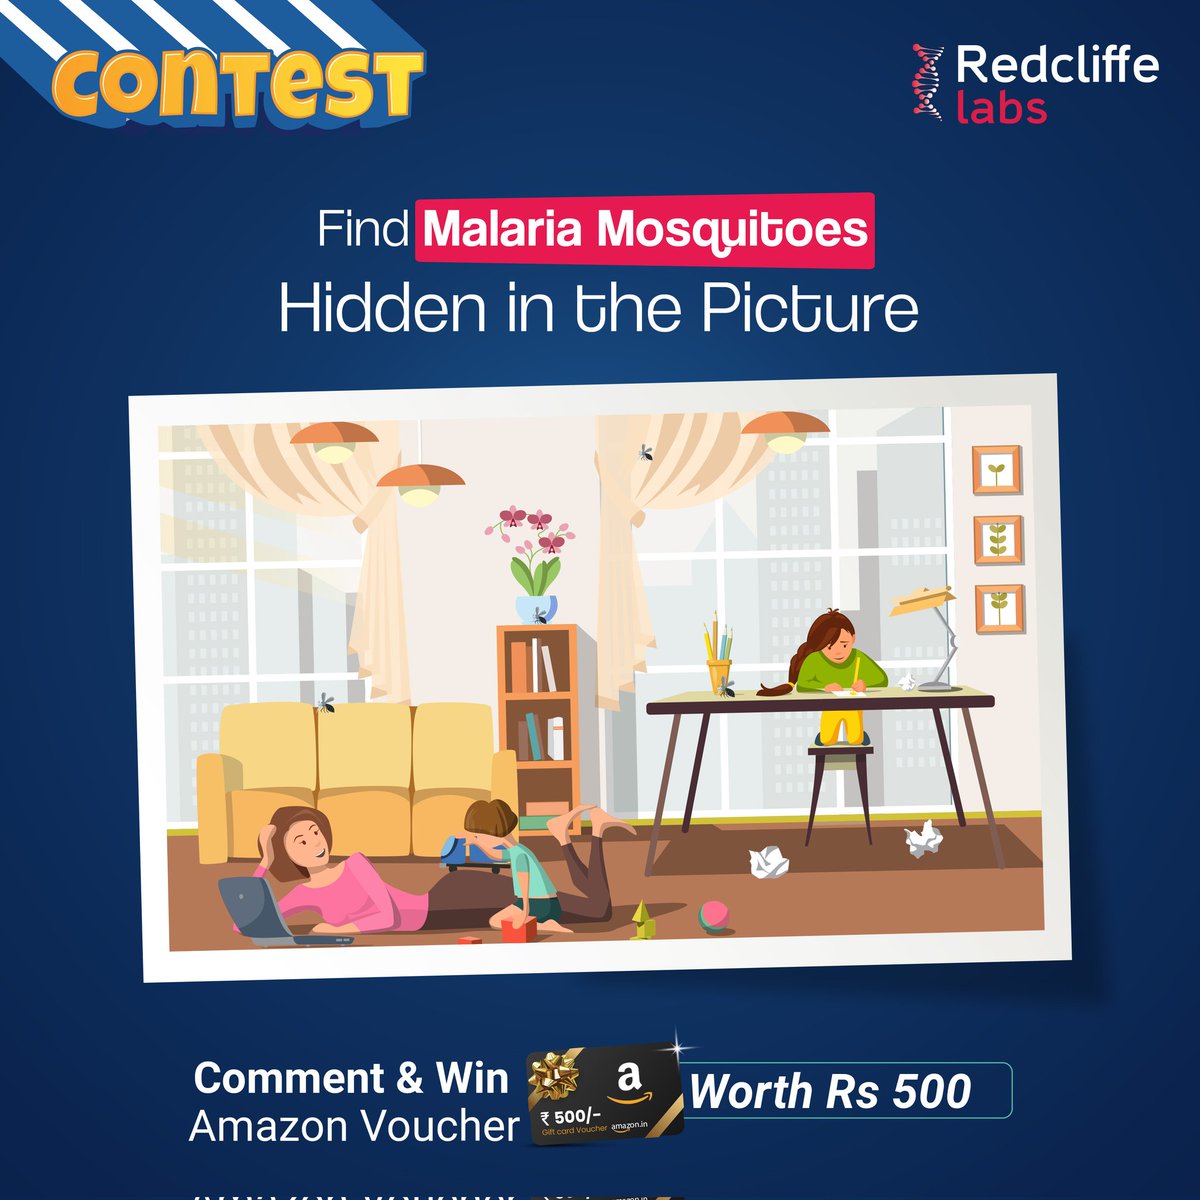 Spot the malaria mosquito? Drop a comment below and stand a chance to win an Amazon voucher worth Rs 500! Steps: 1. Follow us on Insta, FB, YT & Twitter. 2. Tag 5 friends Entries valid till 30th April, 7 PM.